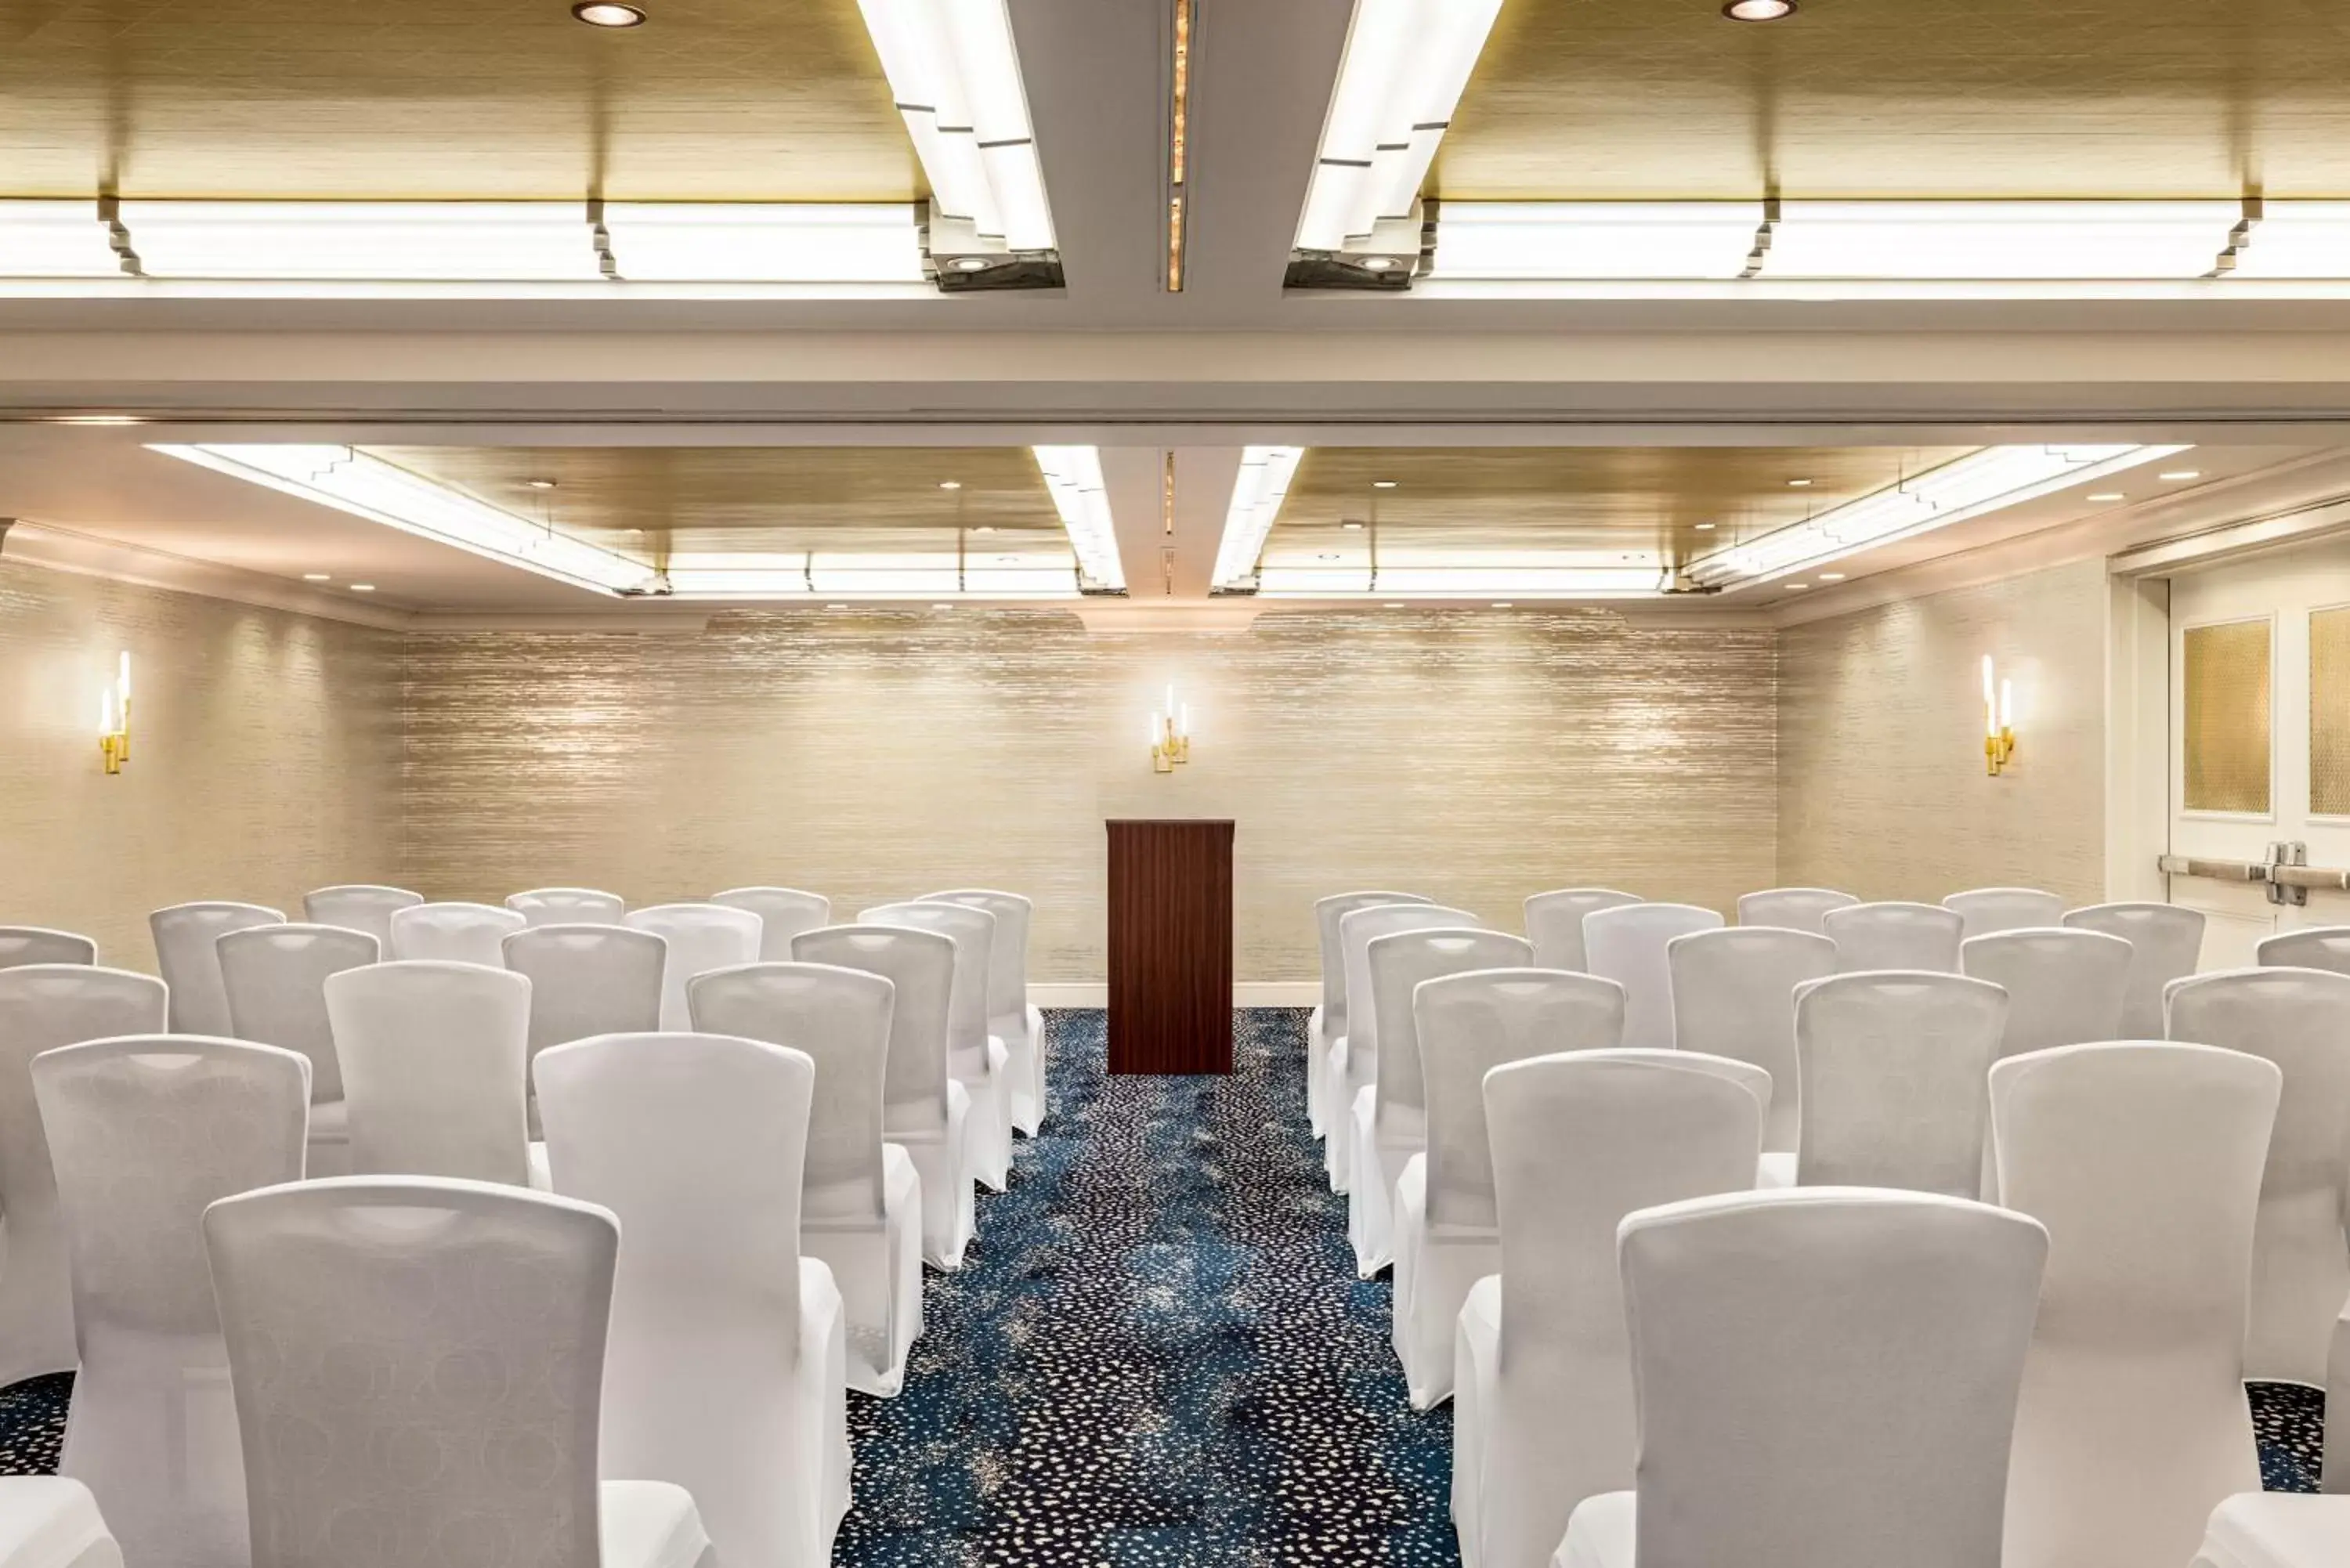 Meeting/conference room, Banquet Facilities in Inn at Great Neck